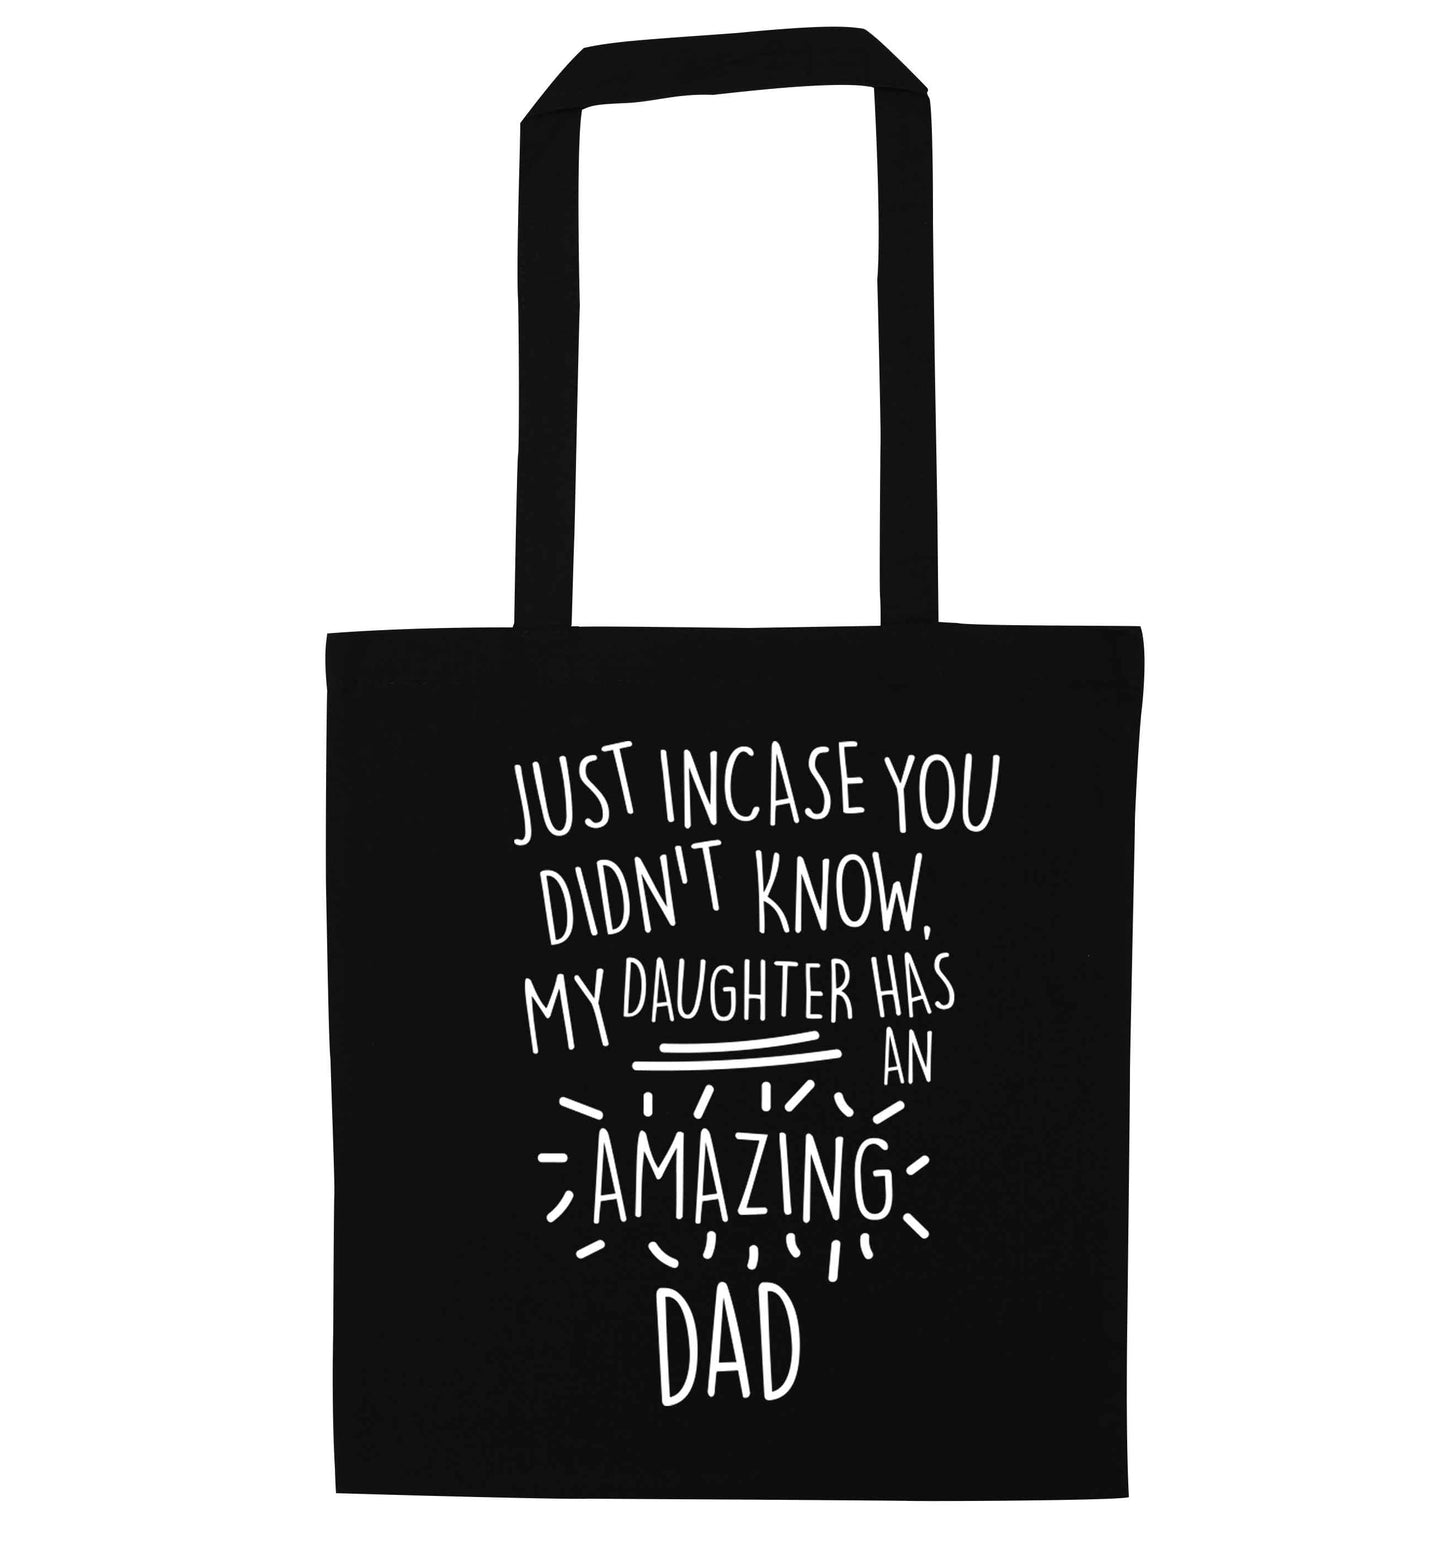 Just incase you didn't know my daughter has an amazing dad black tote bag